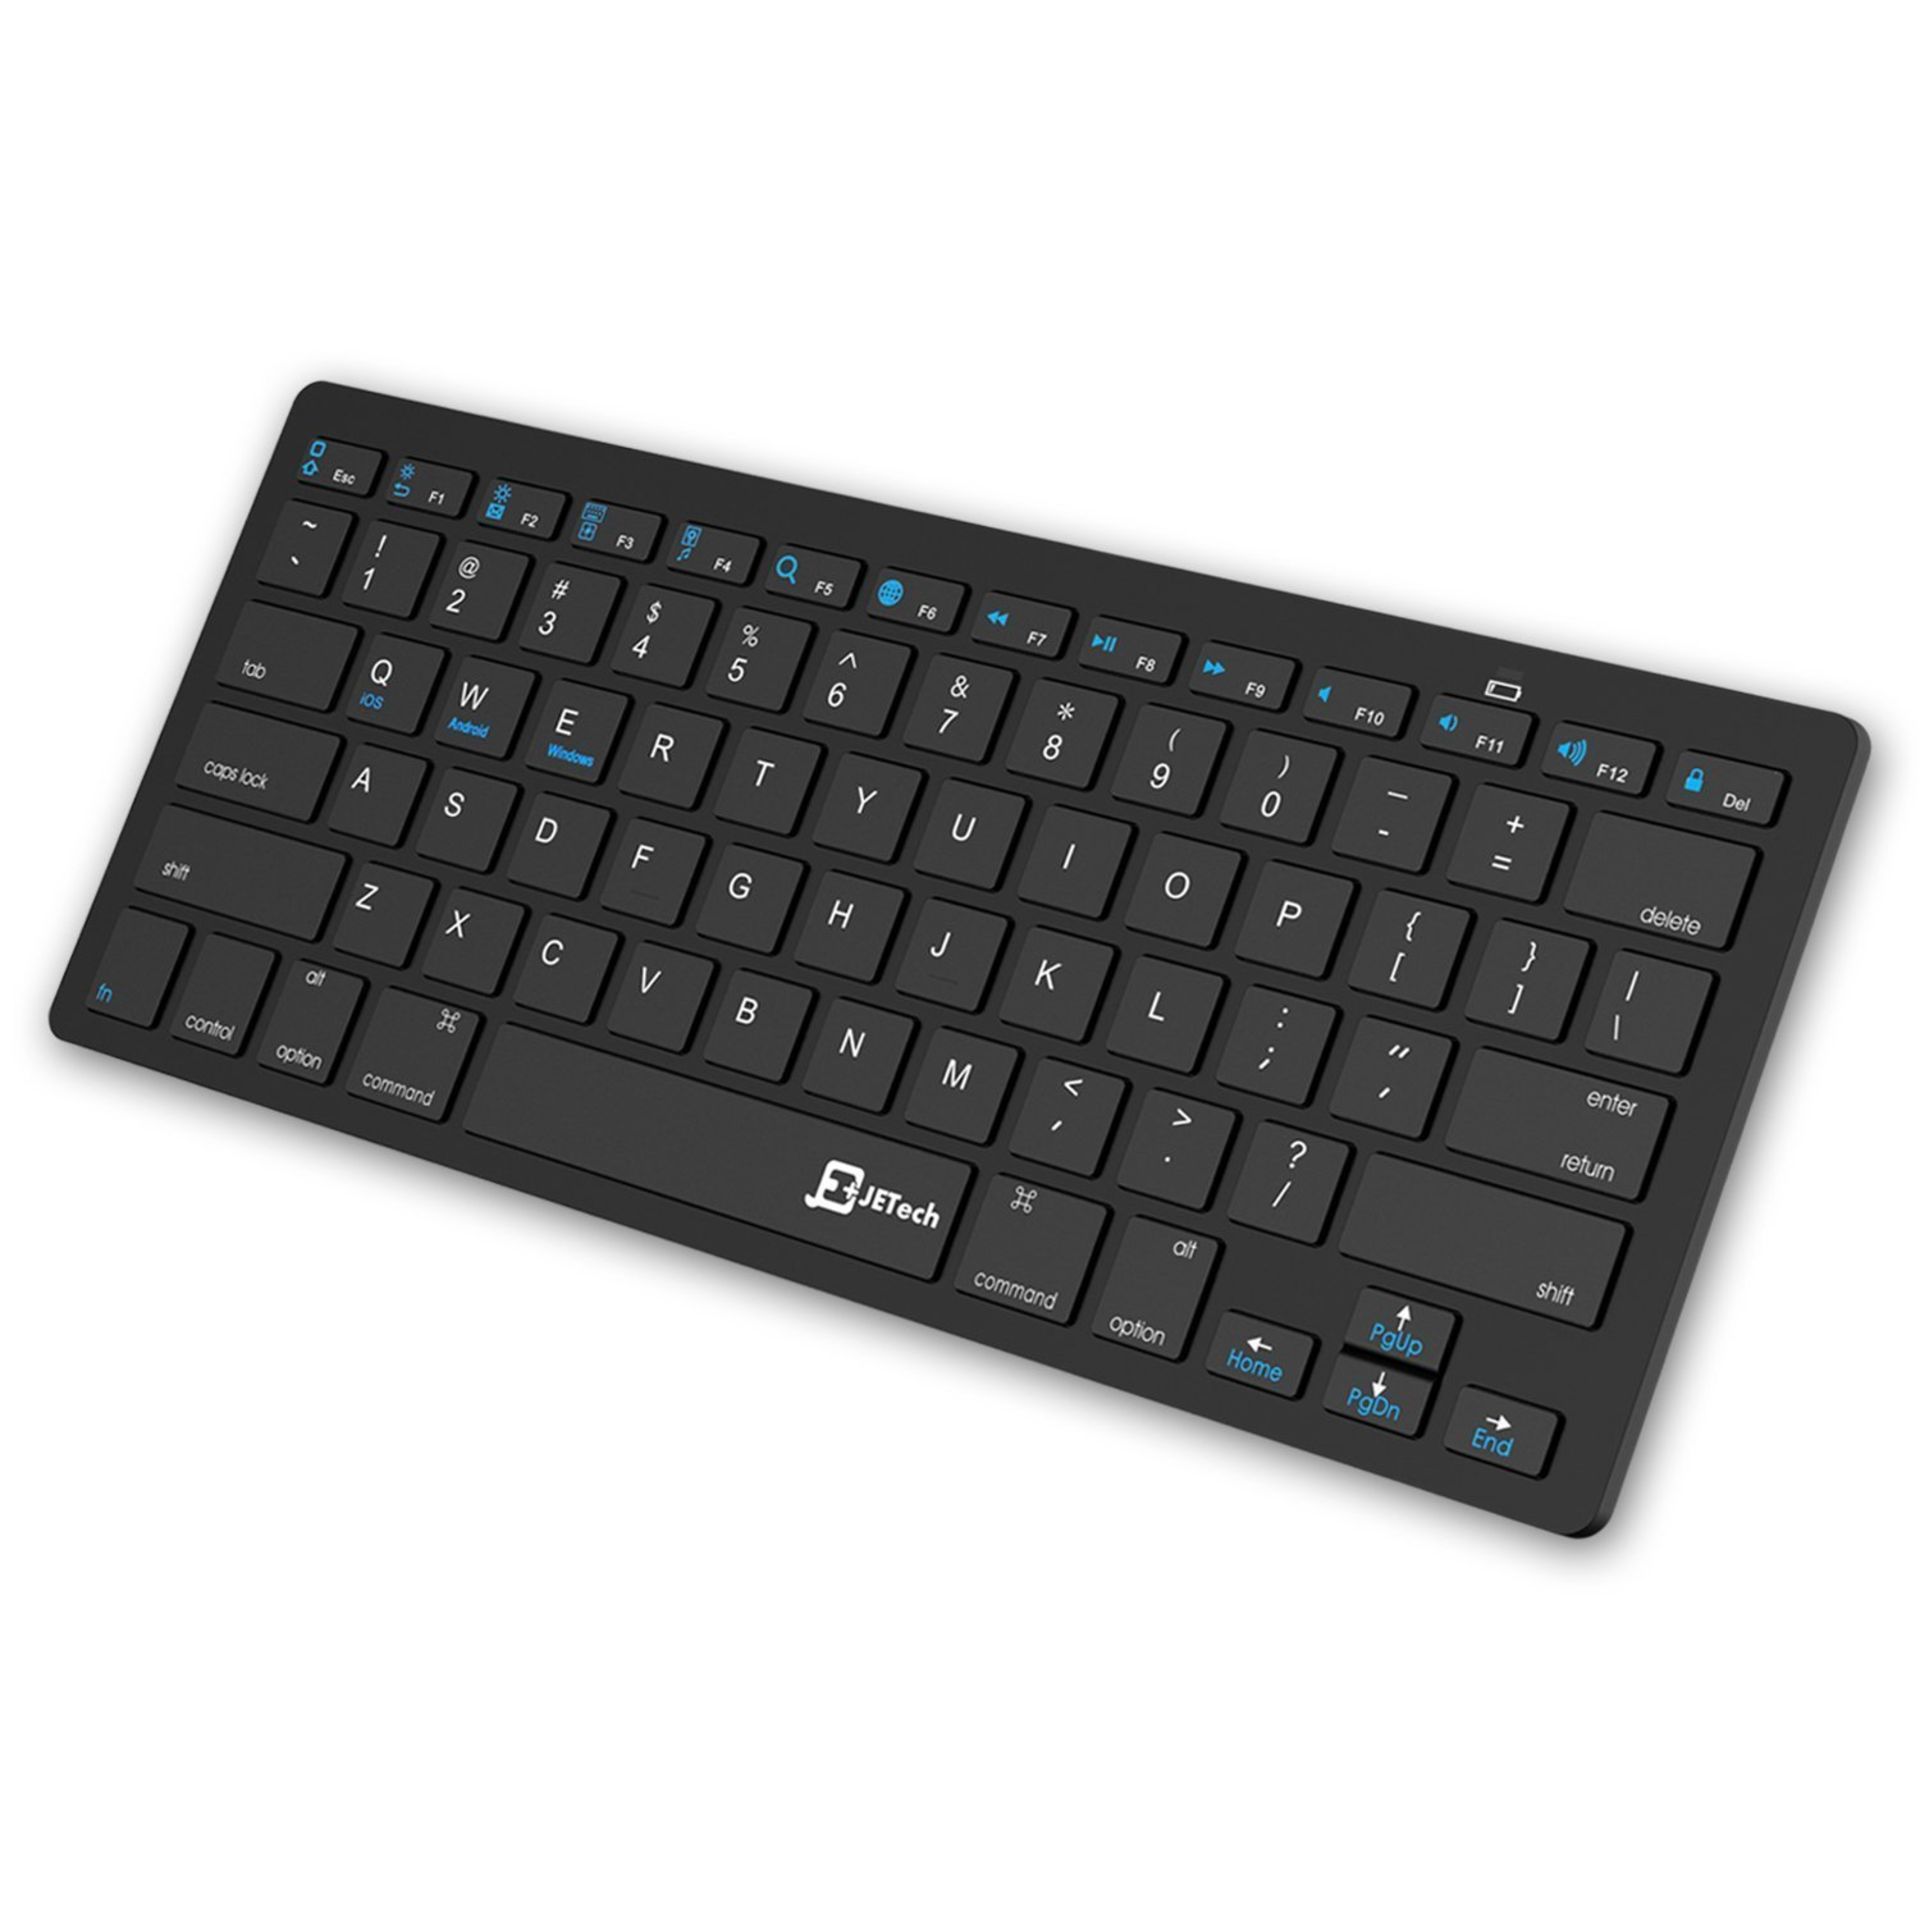 V Grade A Bluetooth Qwerty Keyboard Icluding Wireless Receiver Amazon Price £9.95